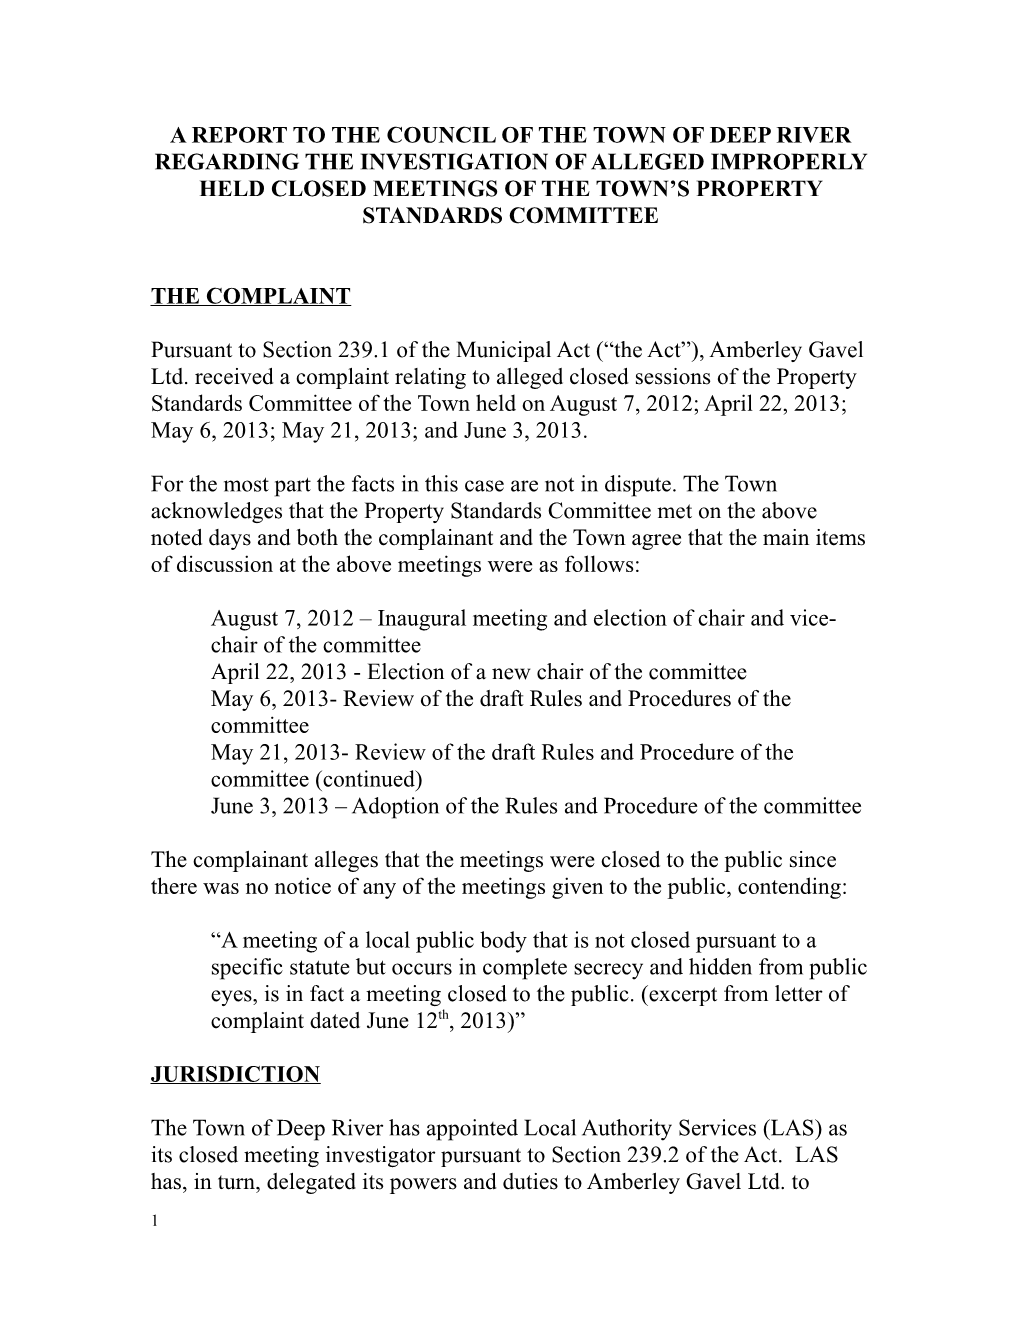 A Report to the Council of the Town of Deep River Regarding the Investigation of Alleged